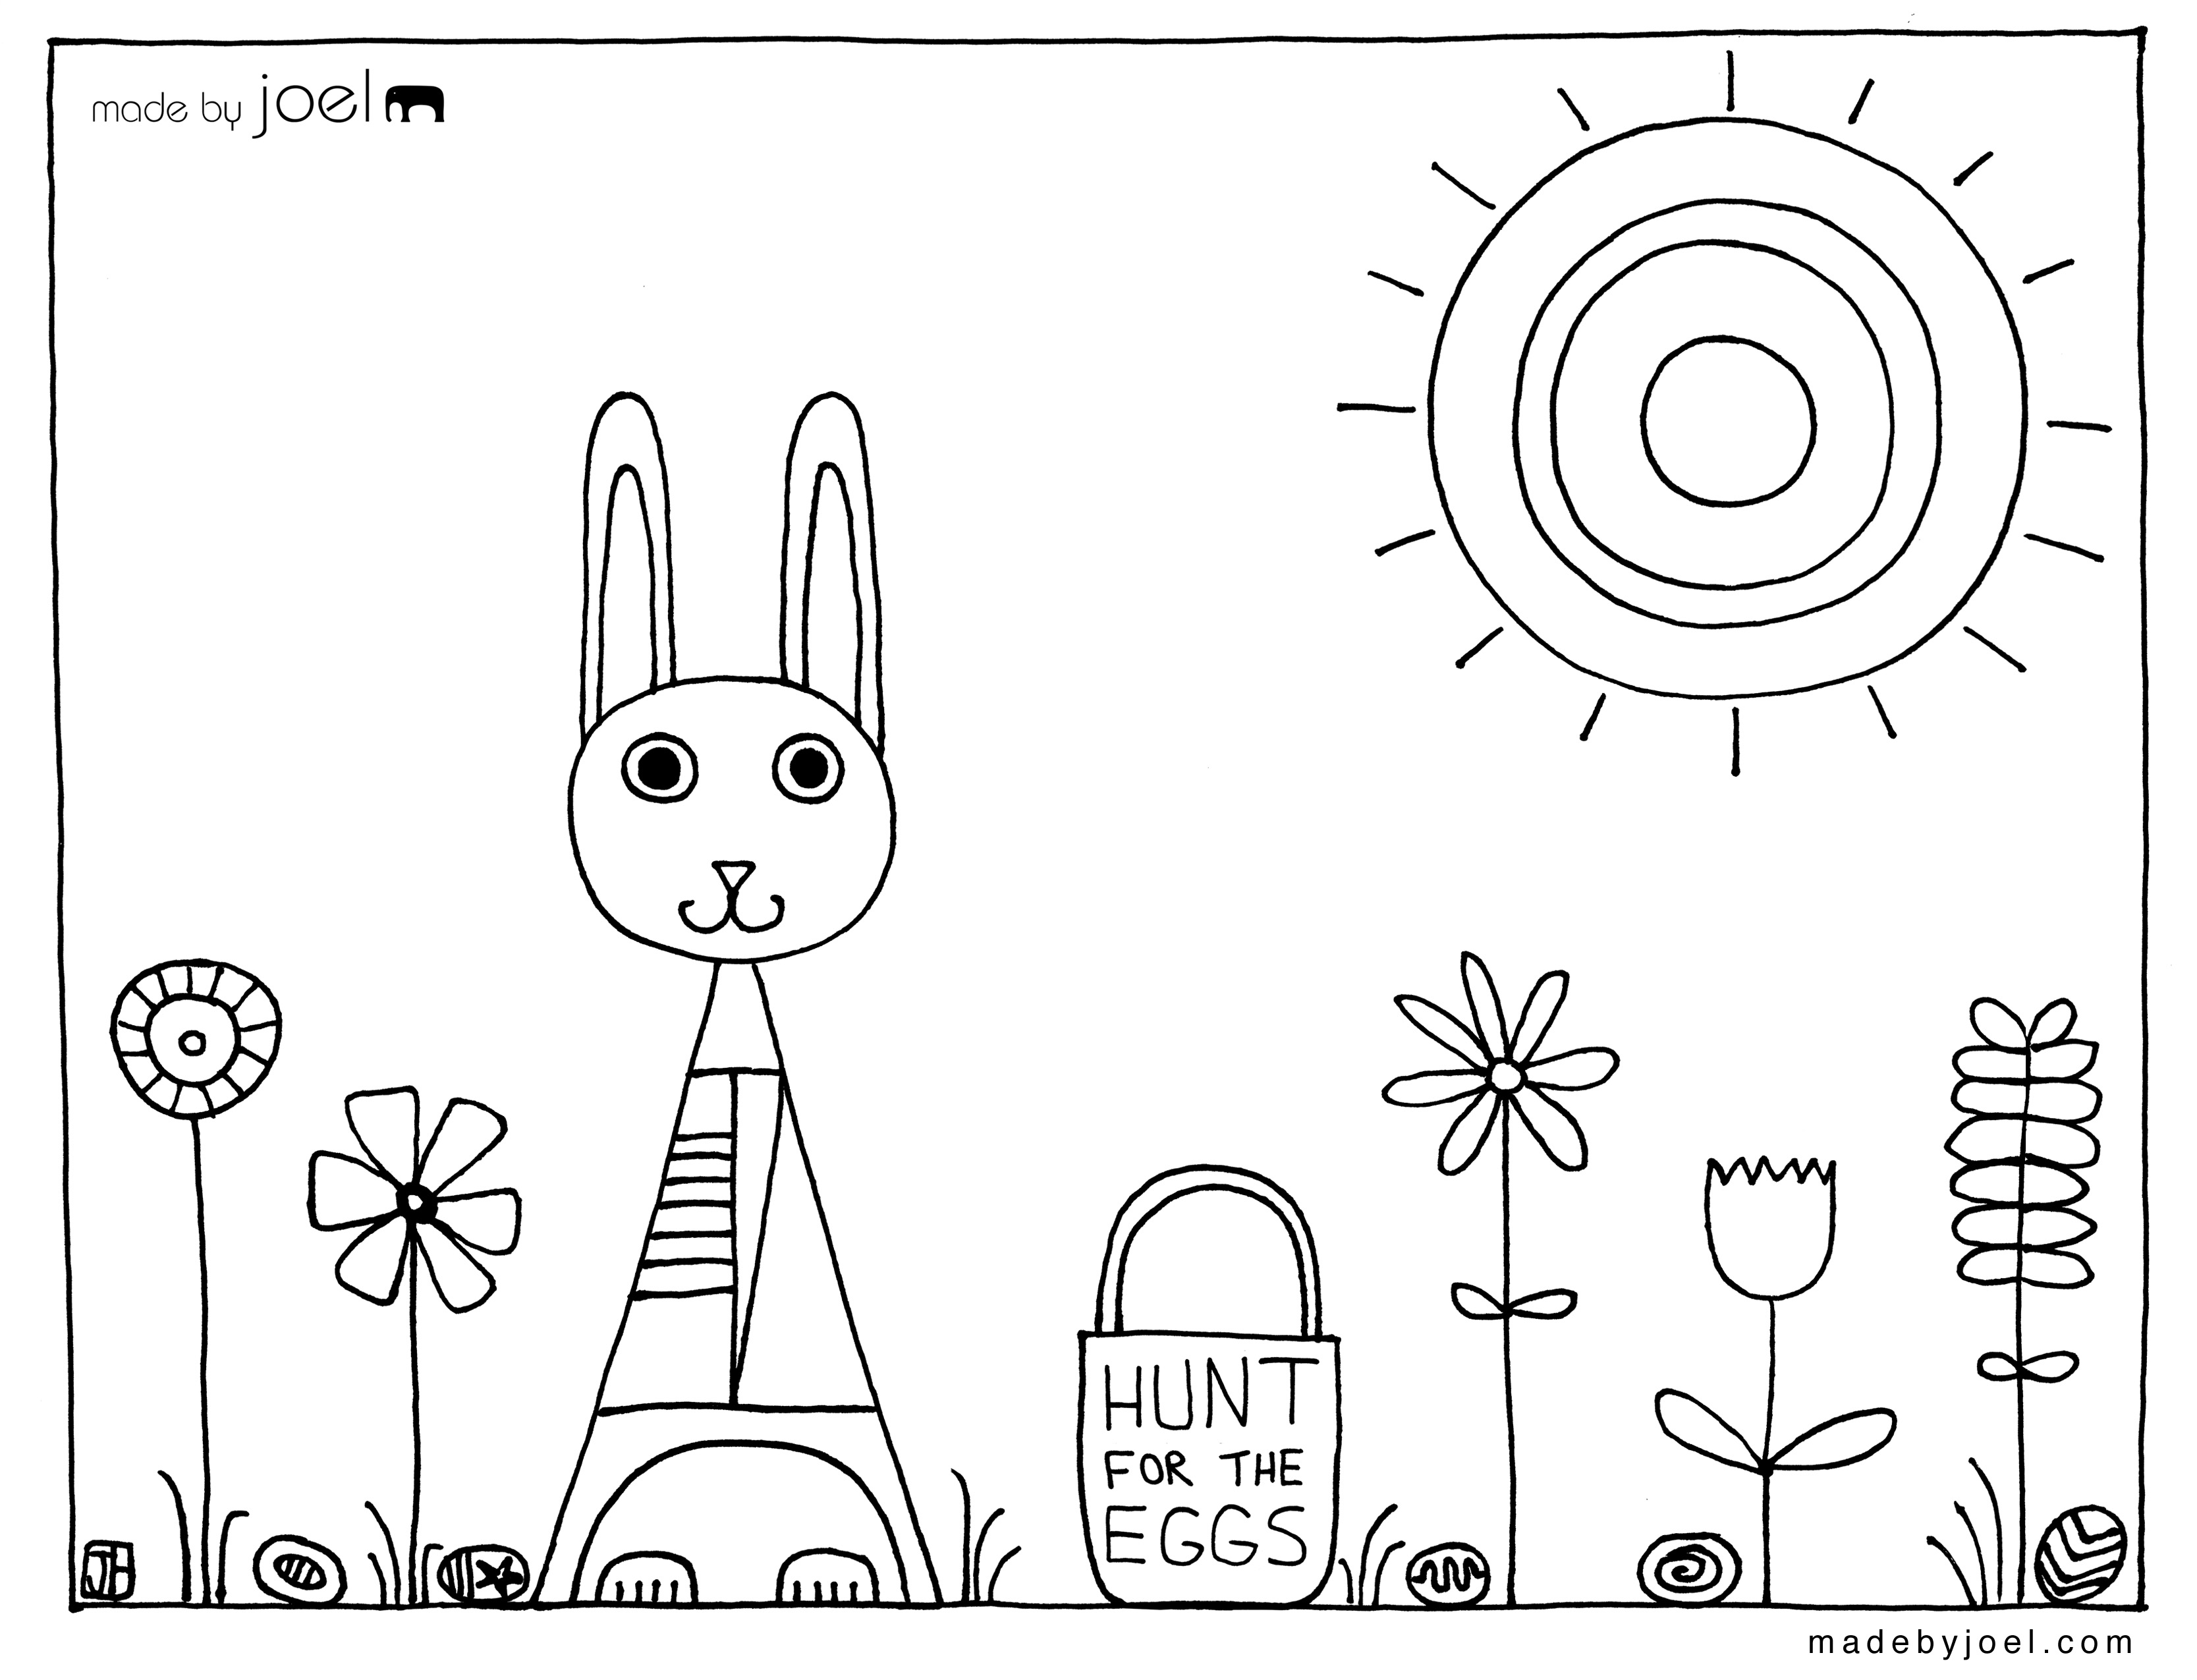 Months Of The Year Coloring Pages at GetColorings.com | Free printable